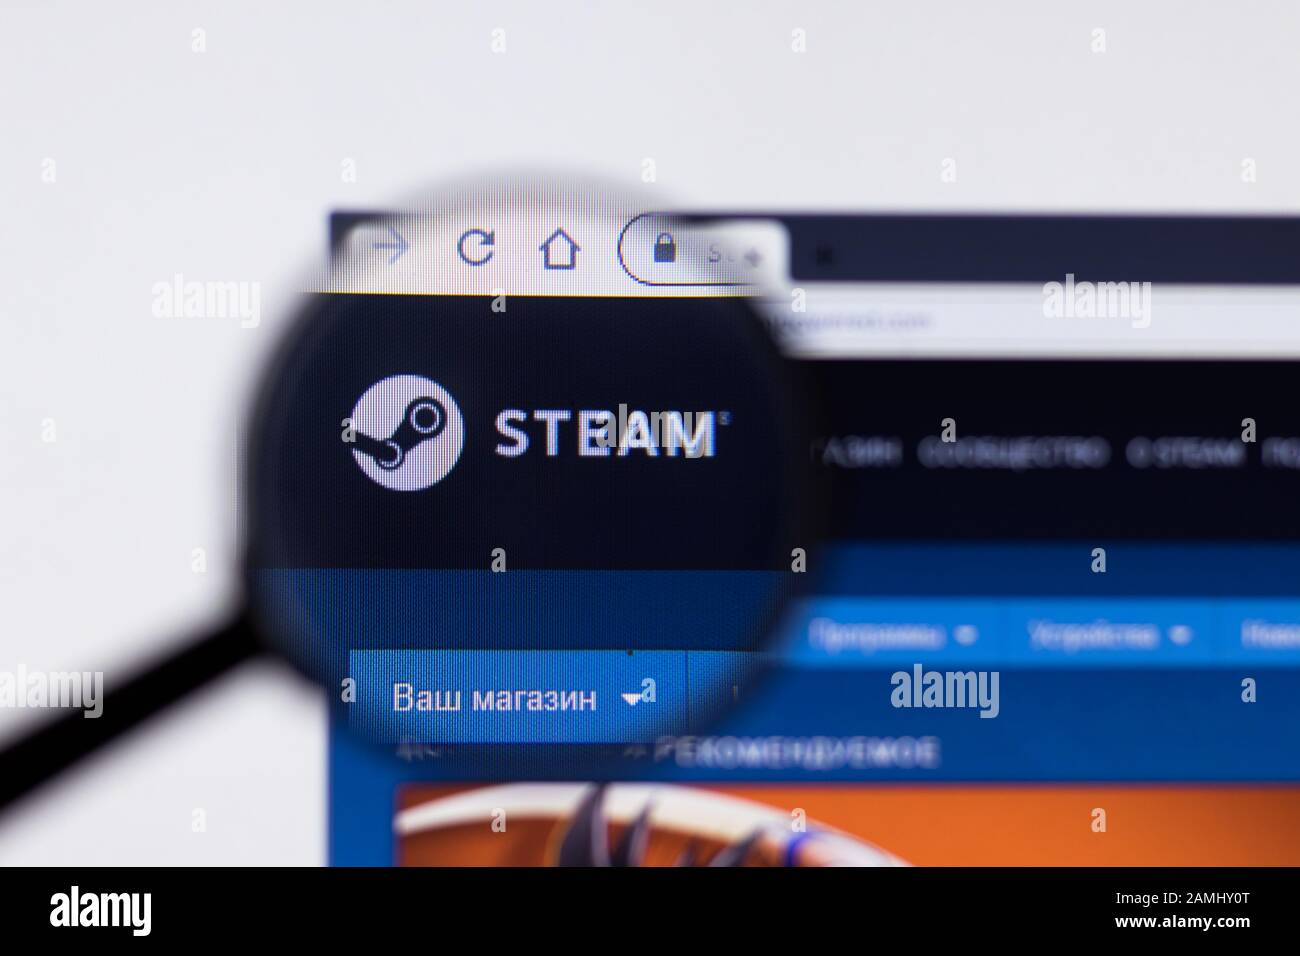 Saint-Petersburg, Russia - 10 January 2020: Steam website page on laptop display with logo, Illustrative Editorial Stock Photo